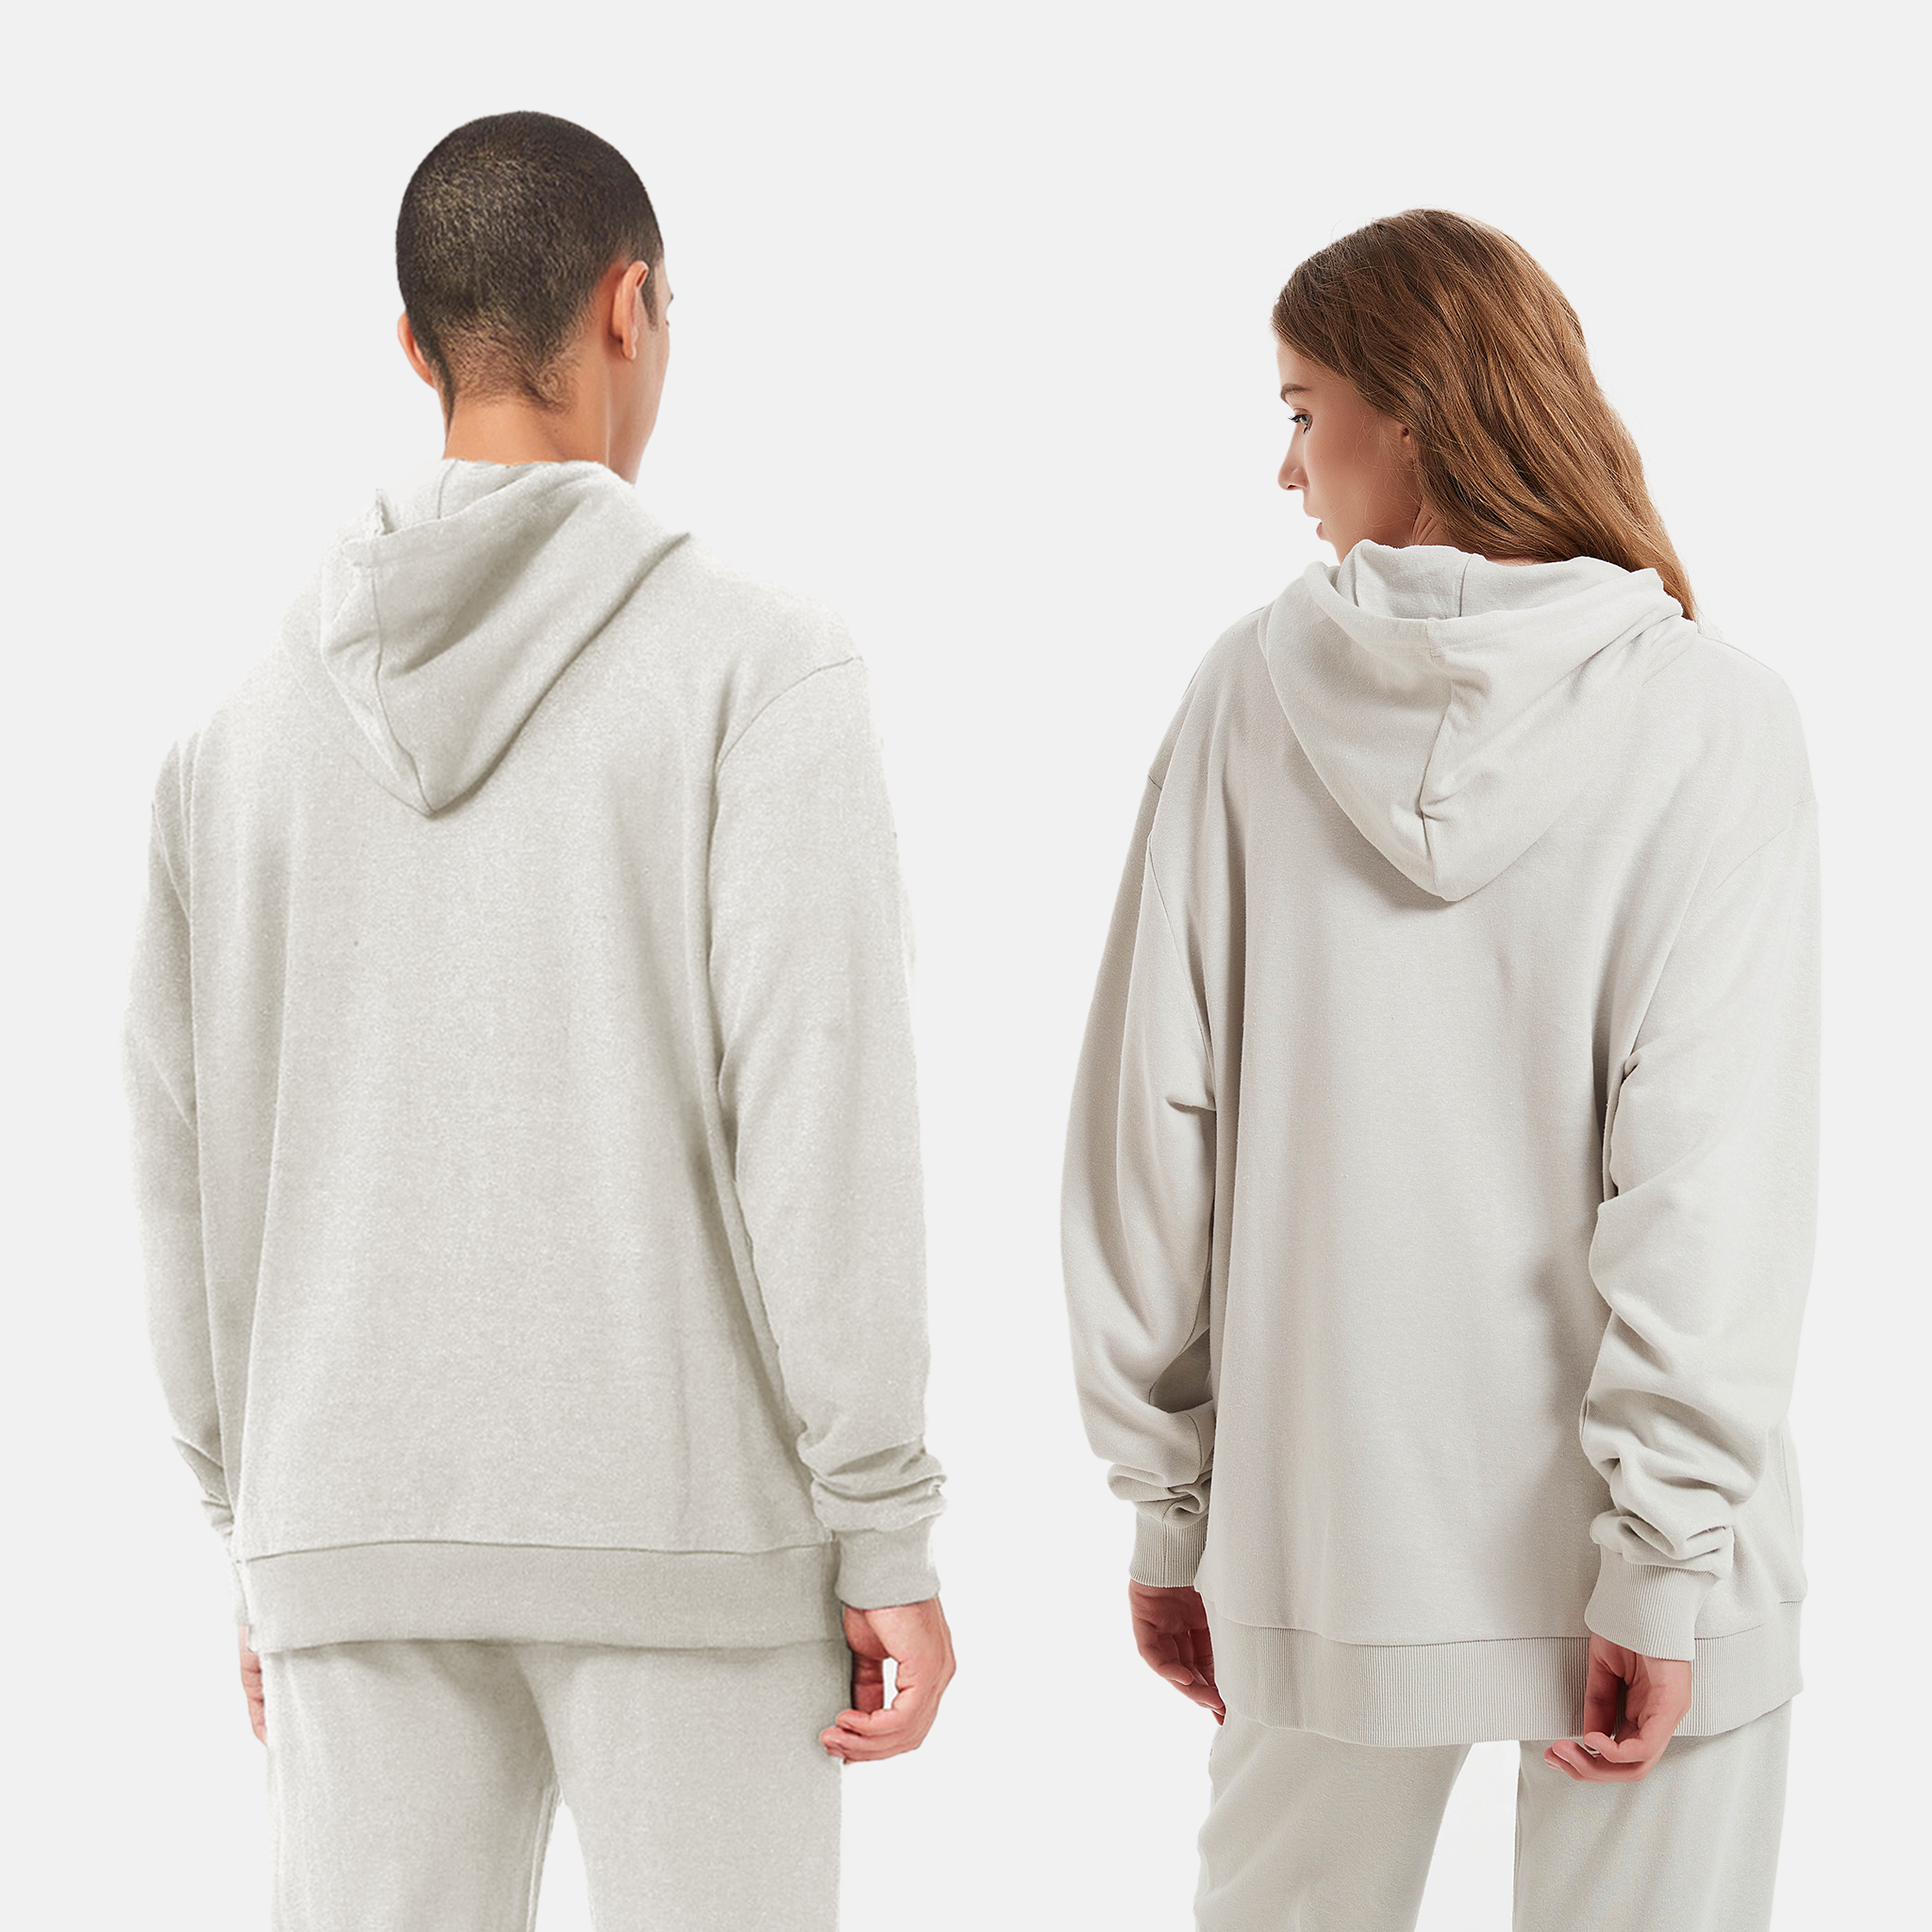 Ethically made gray hoodie sustainable fashion at its finest, Unisex